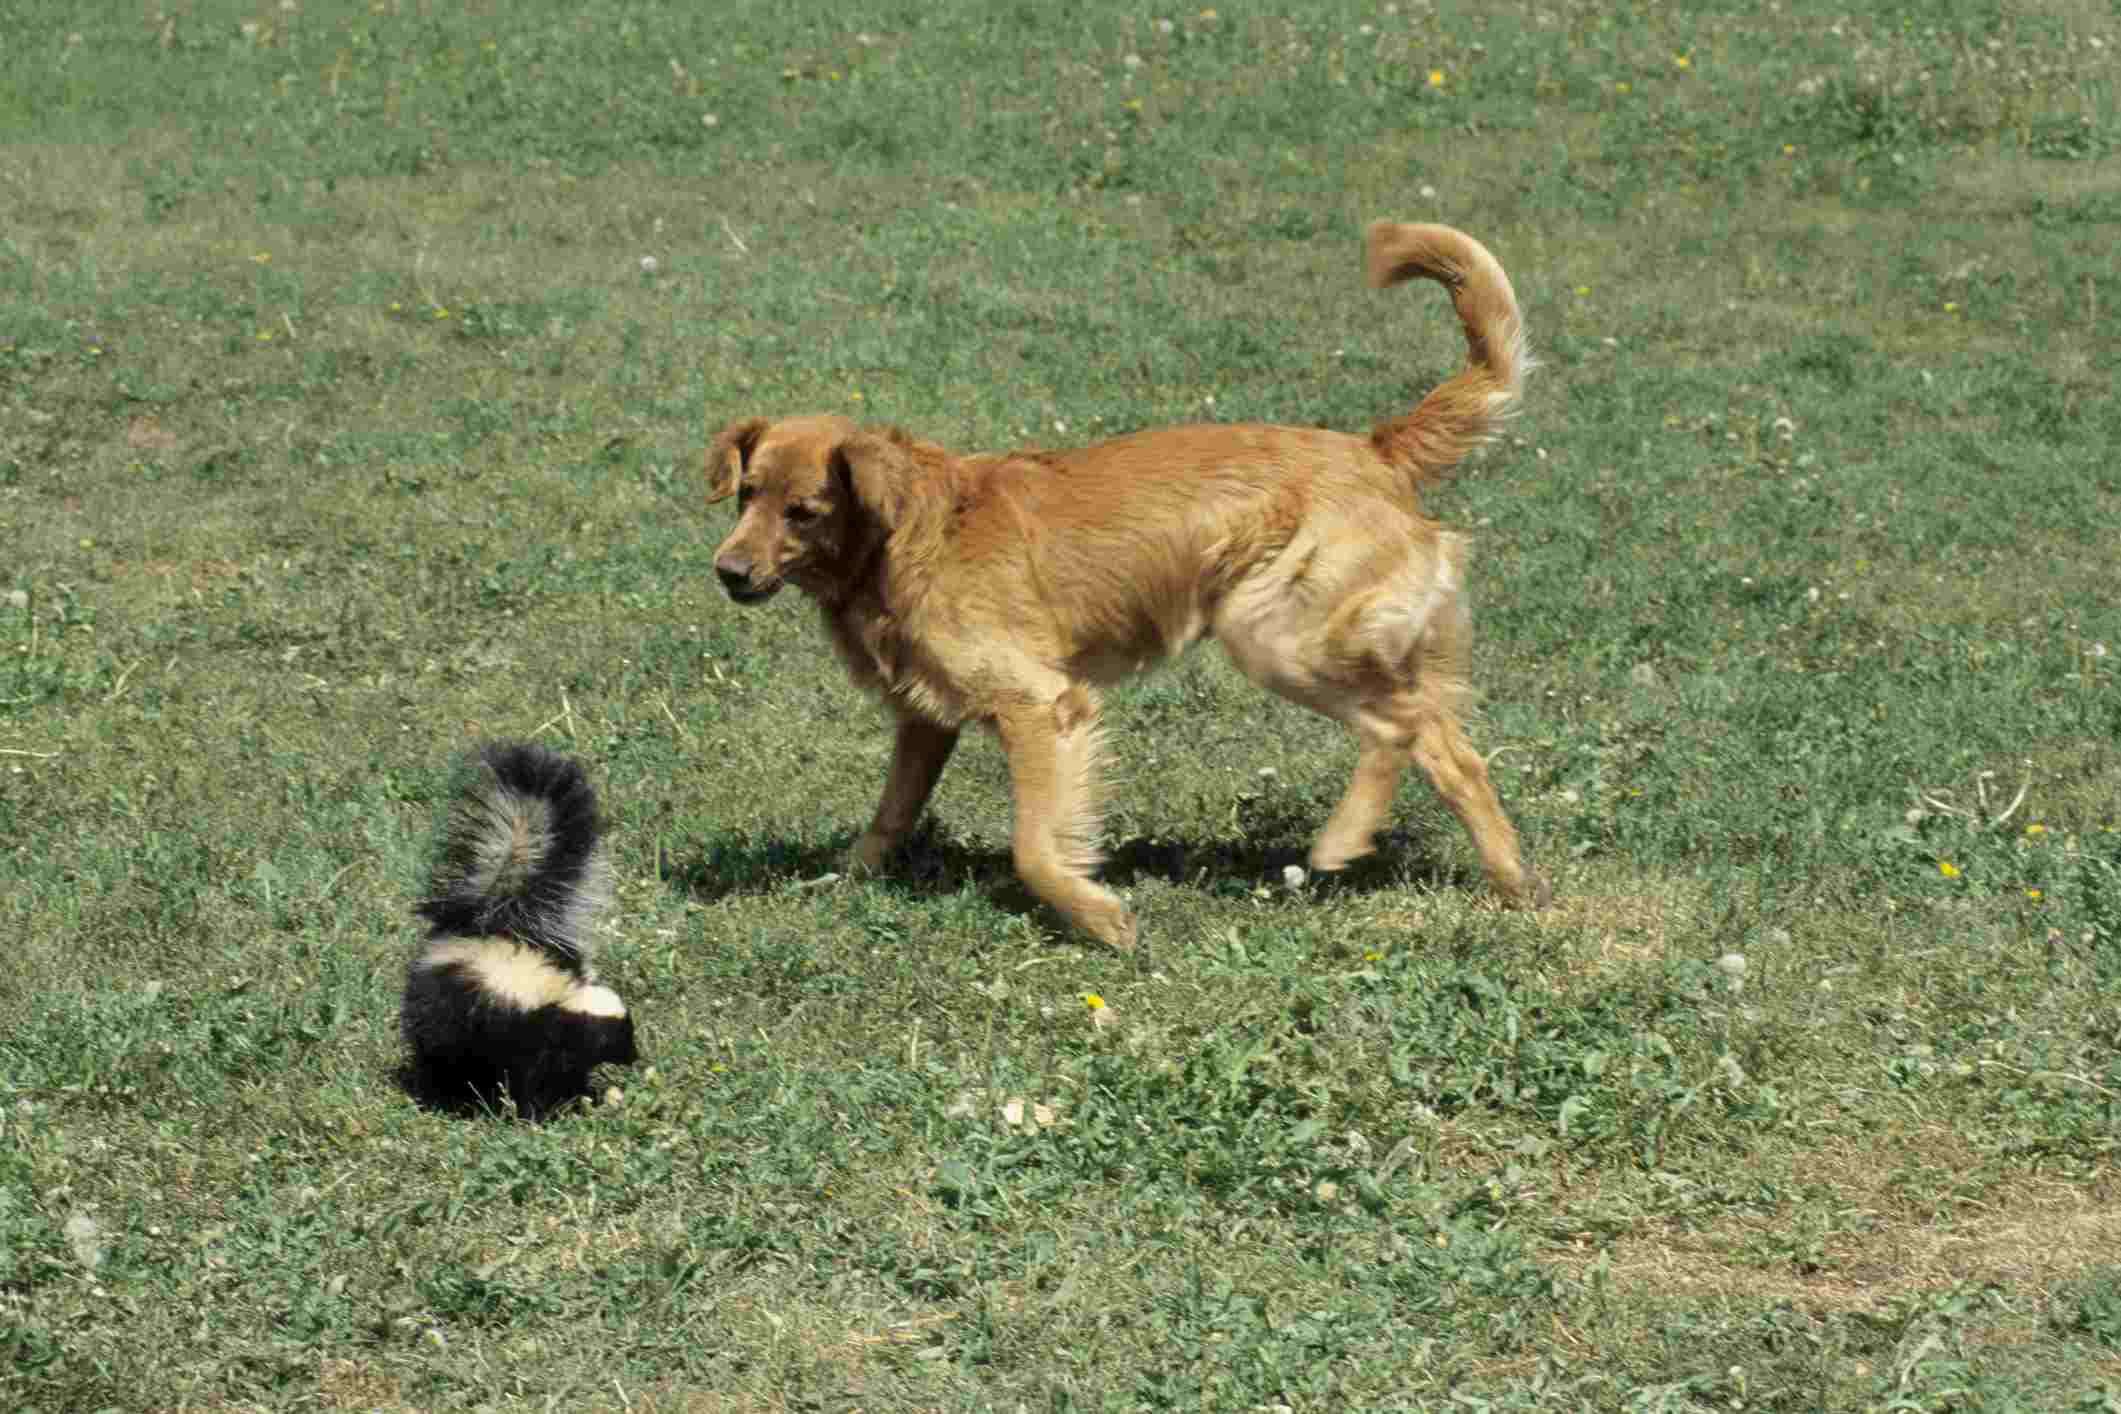 Striped Skunk, Mephitis mephitis, in defensive posture trying to spray dog